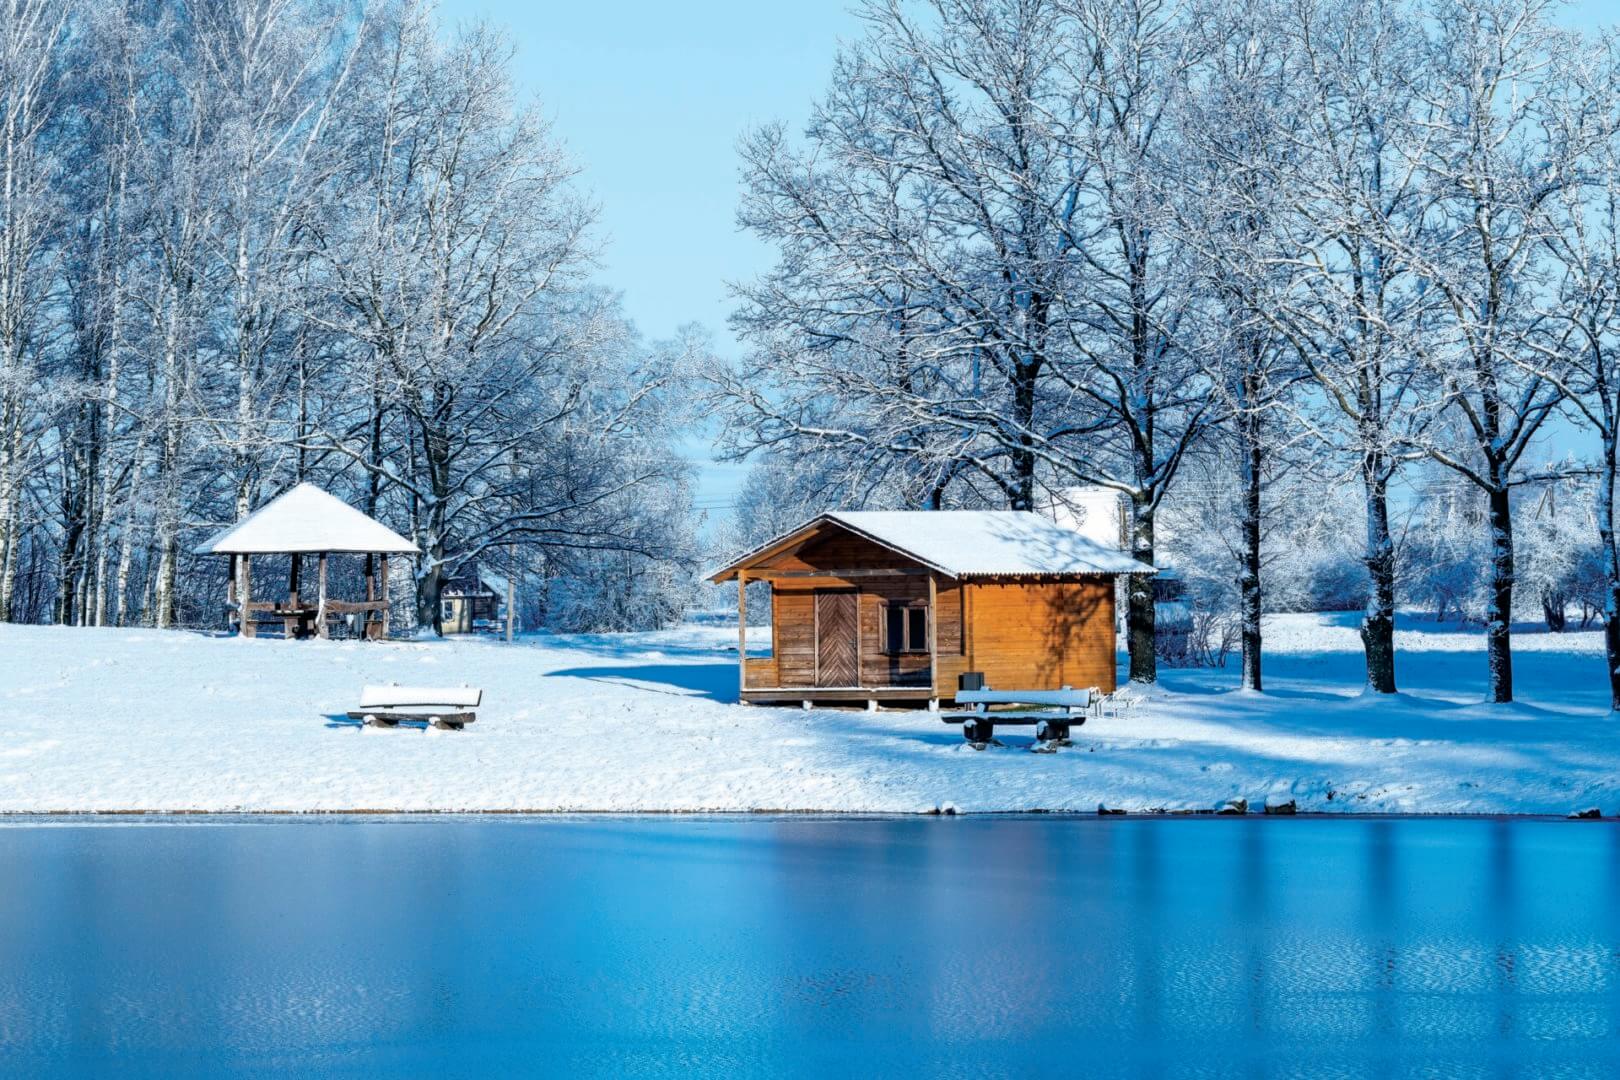 Cabin-on-Frozen-Lake-scaled (1)